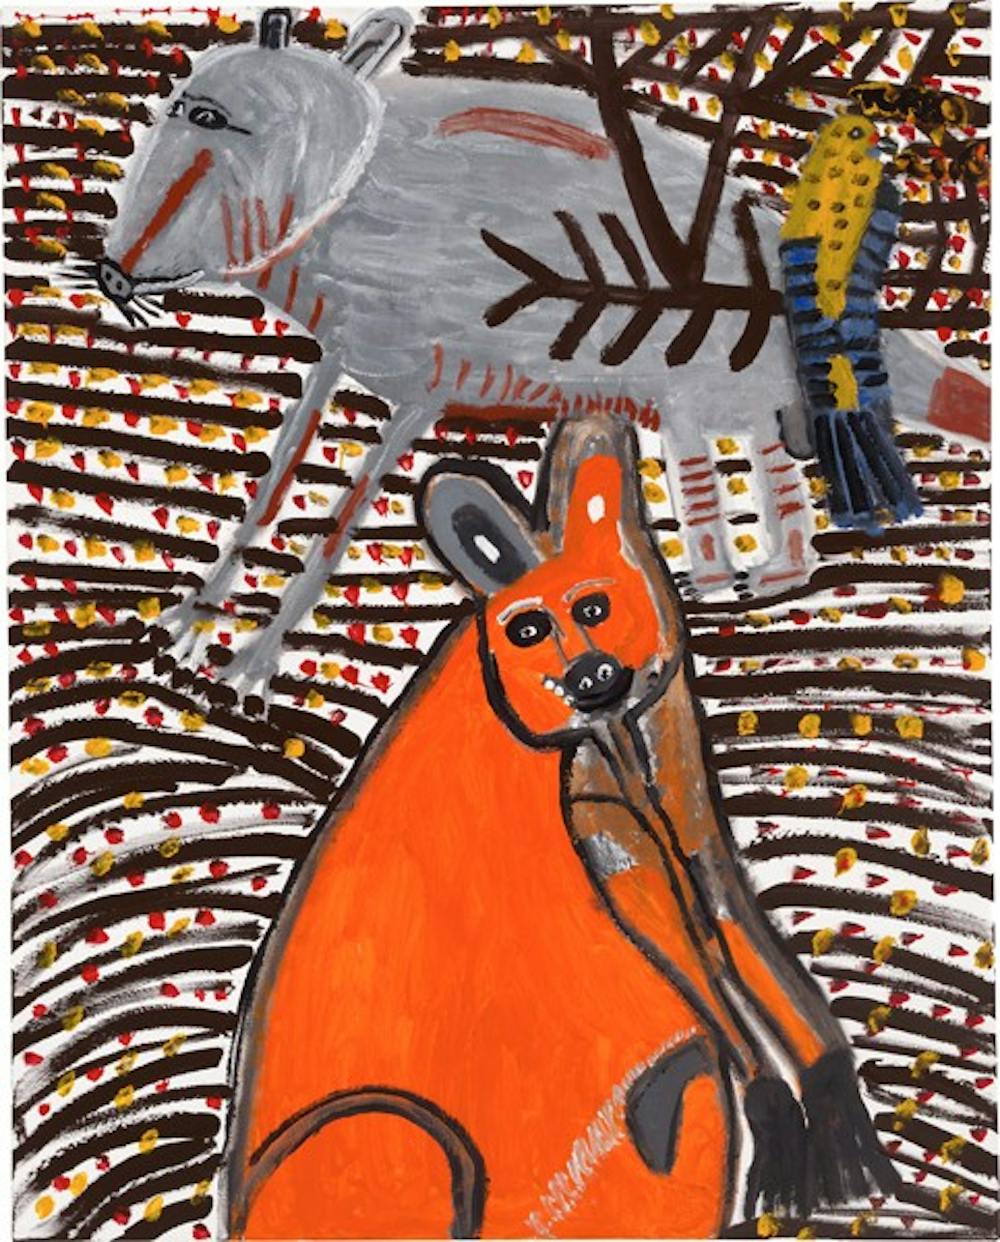 DOWN UNDER -- Works of various Aboriginal artists will be on display at the Katzen Arts Center starting Tuesday, Sept. 8. The above piece, by Trevor \"Turbo\" Brown, is entitled \"Dreamtime kangaroo and bird.\"